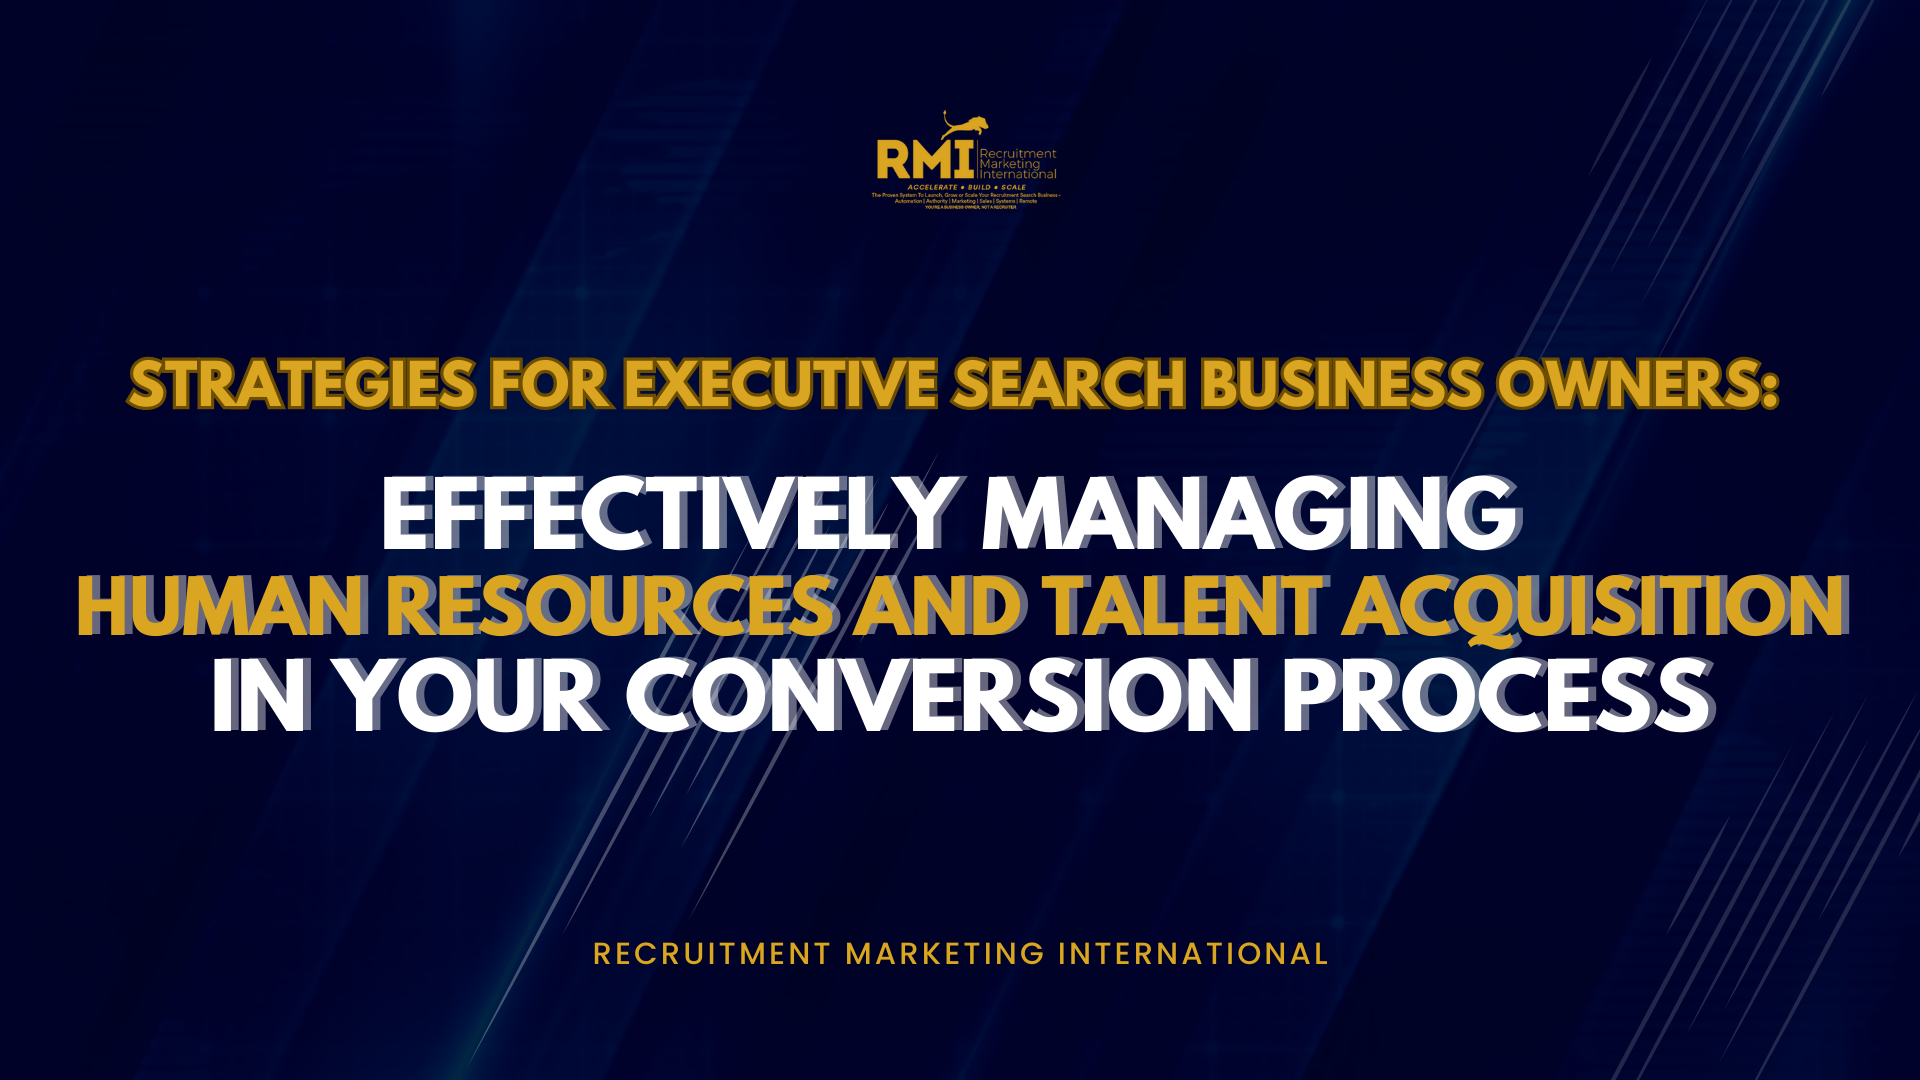 PODCAST 239 – STRATEGIES FOR EXECUTIVE SEARCH BUSINESS OWNERS: EFFECTIVELY MANAGING HUMAN RESOURCES AND TALENT ACQUISITION IN YOUR CONVERSION PROCESS